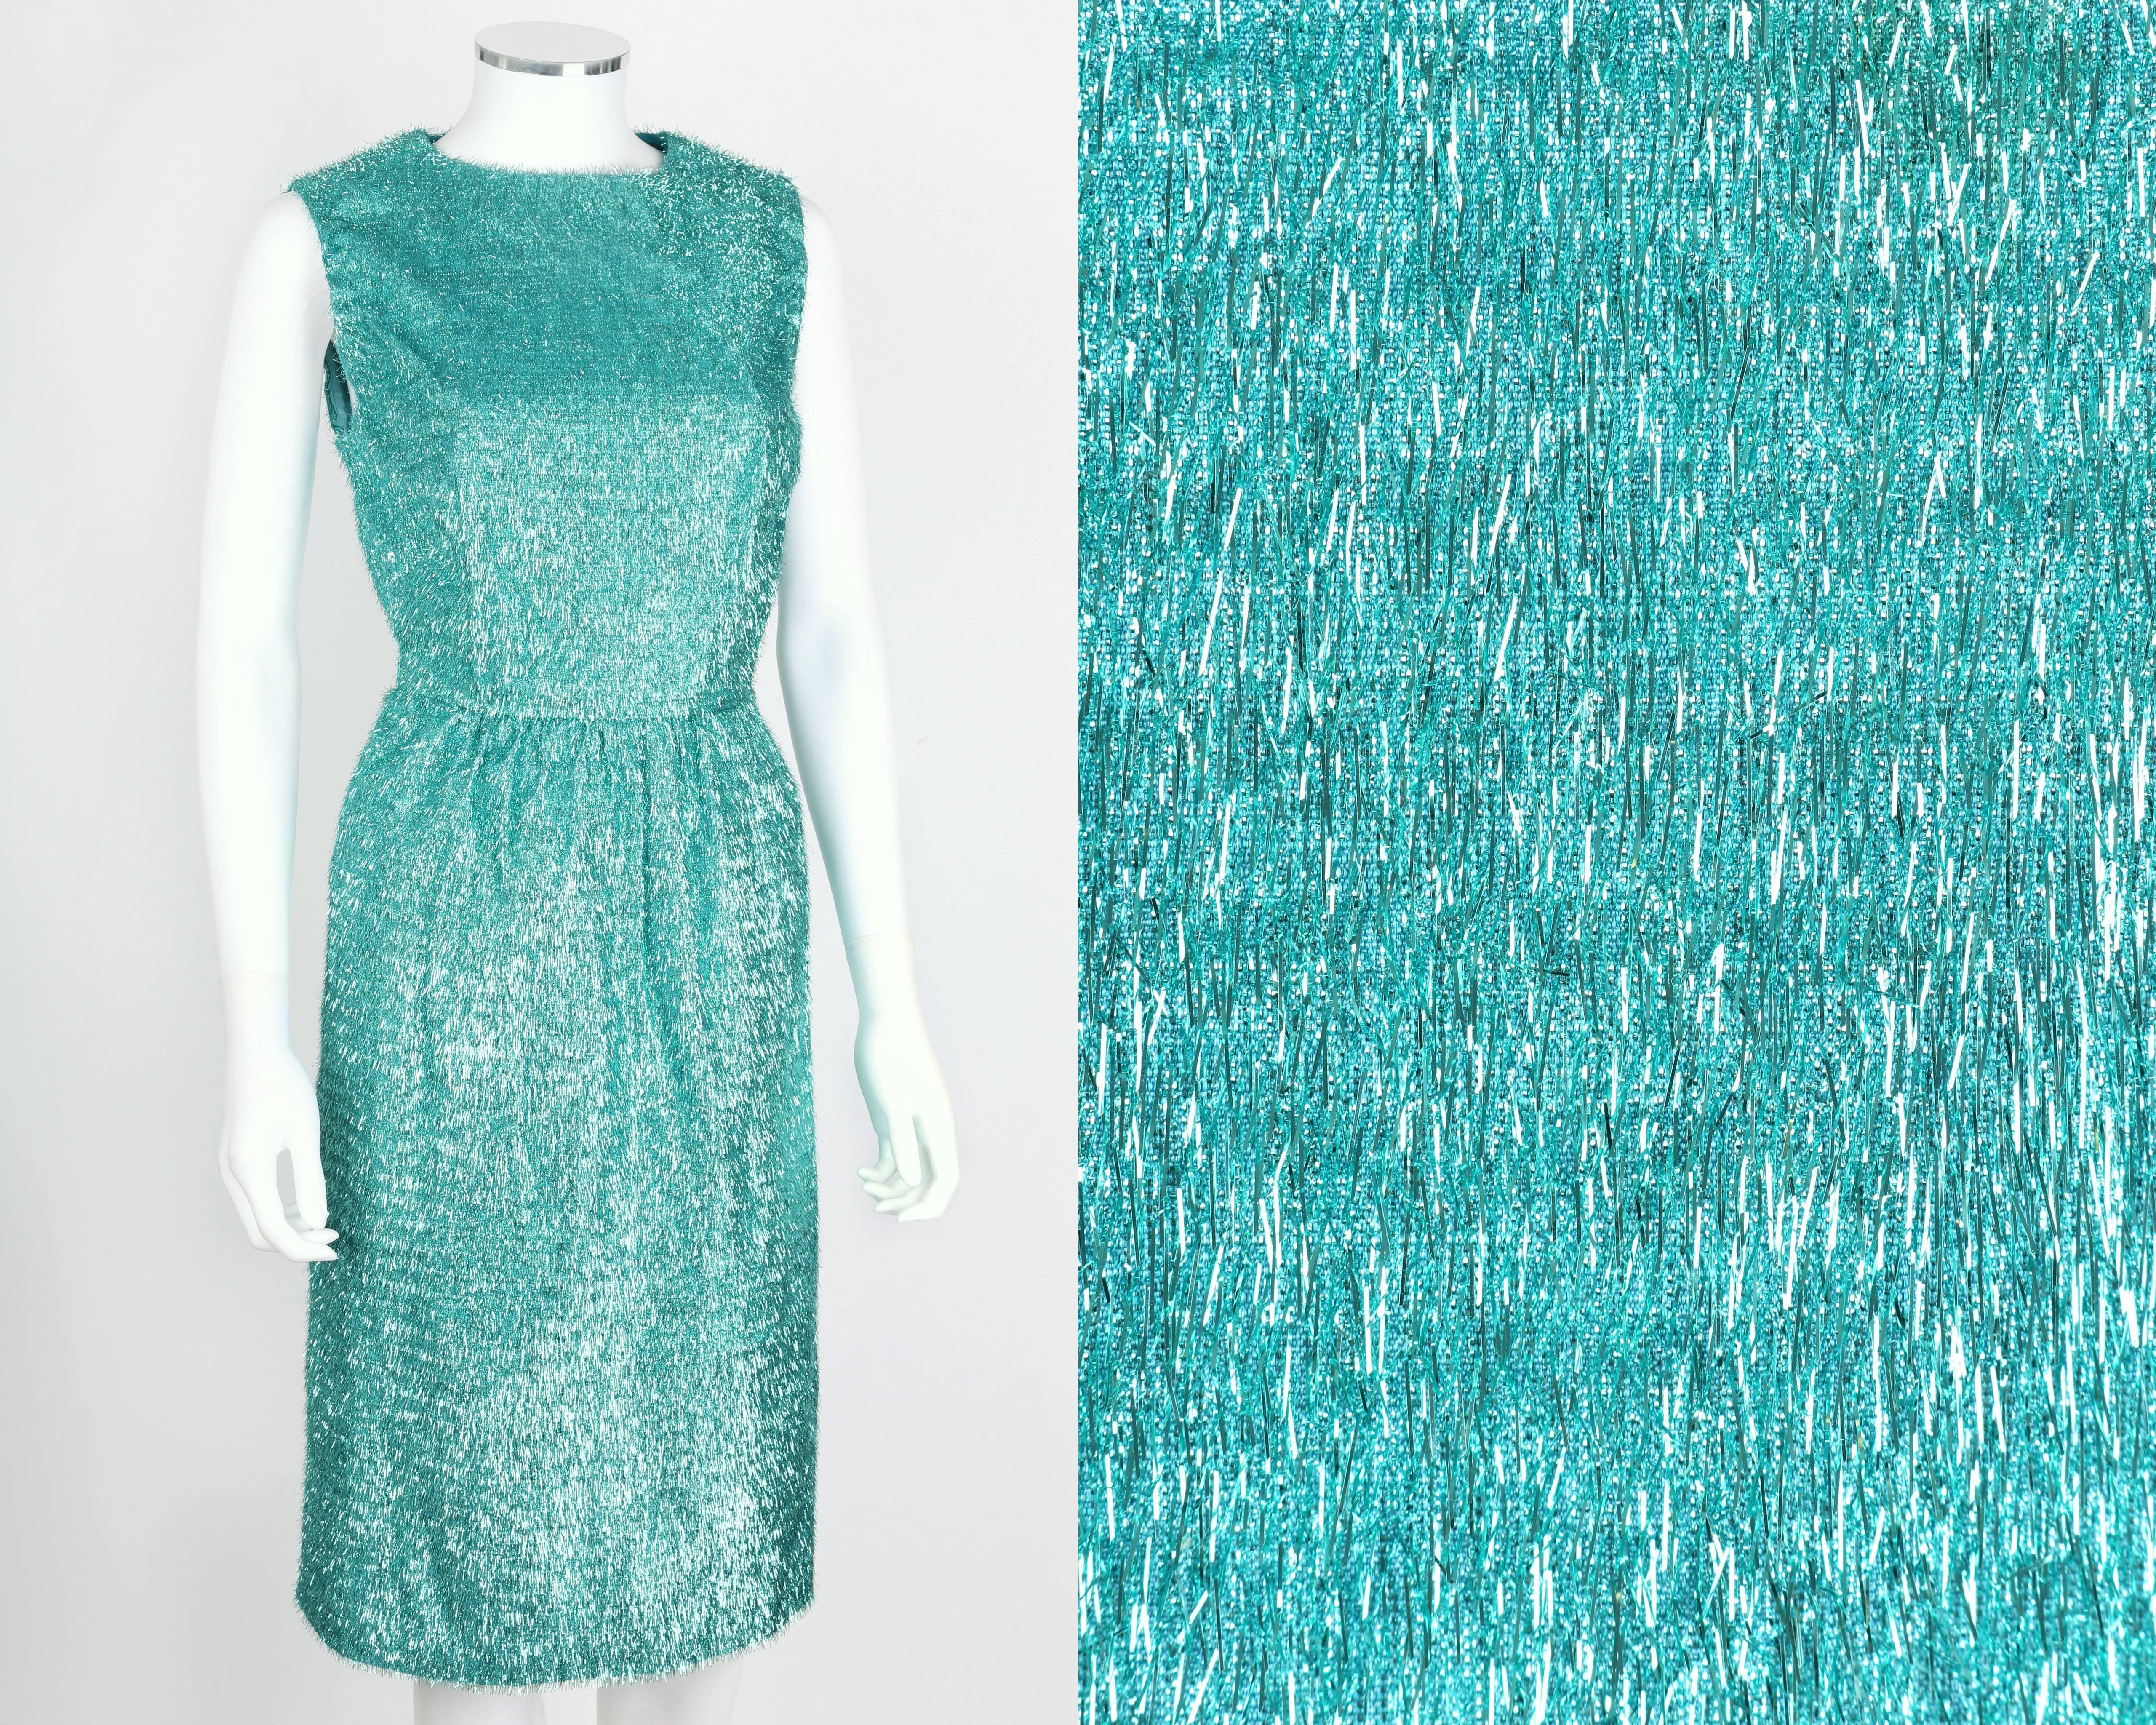 Vintage couture c.1960's turquoise blue metallic tinsel party dress. Shift style. Jewel neckline. Sleeveless. Center back zipper closure. Bust darts. Center back slit. Unlined. Please note this item was clipped to better fit our mannequin for